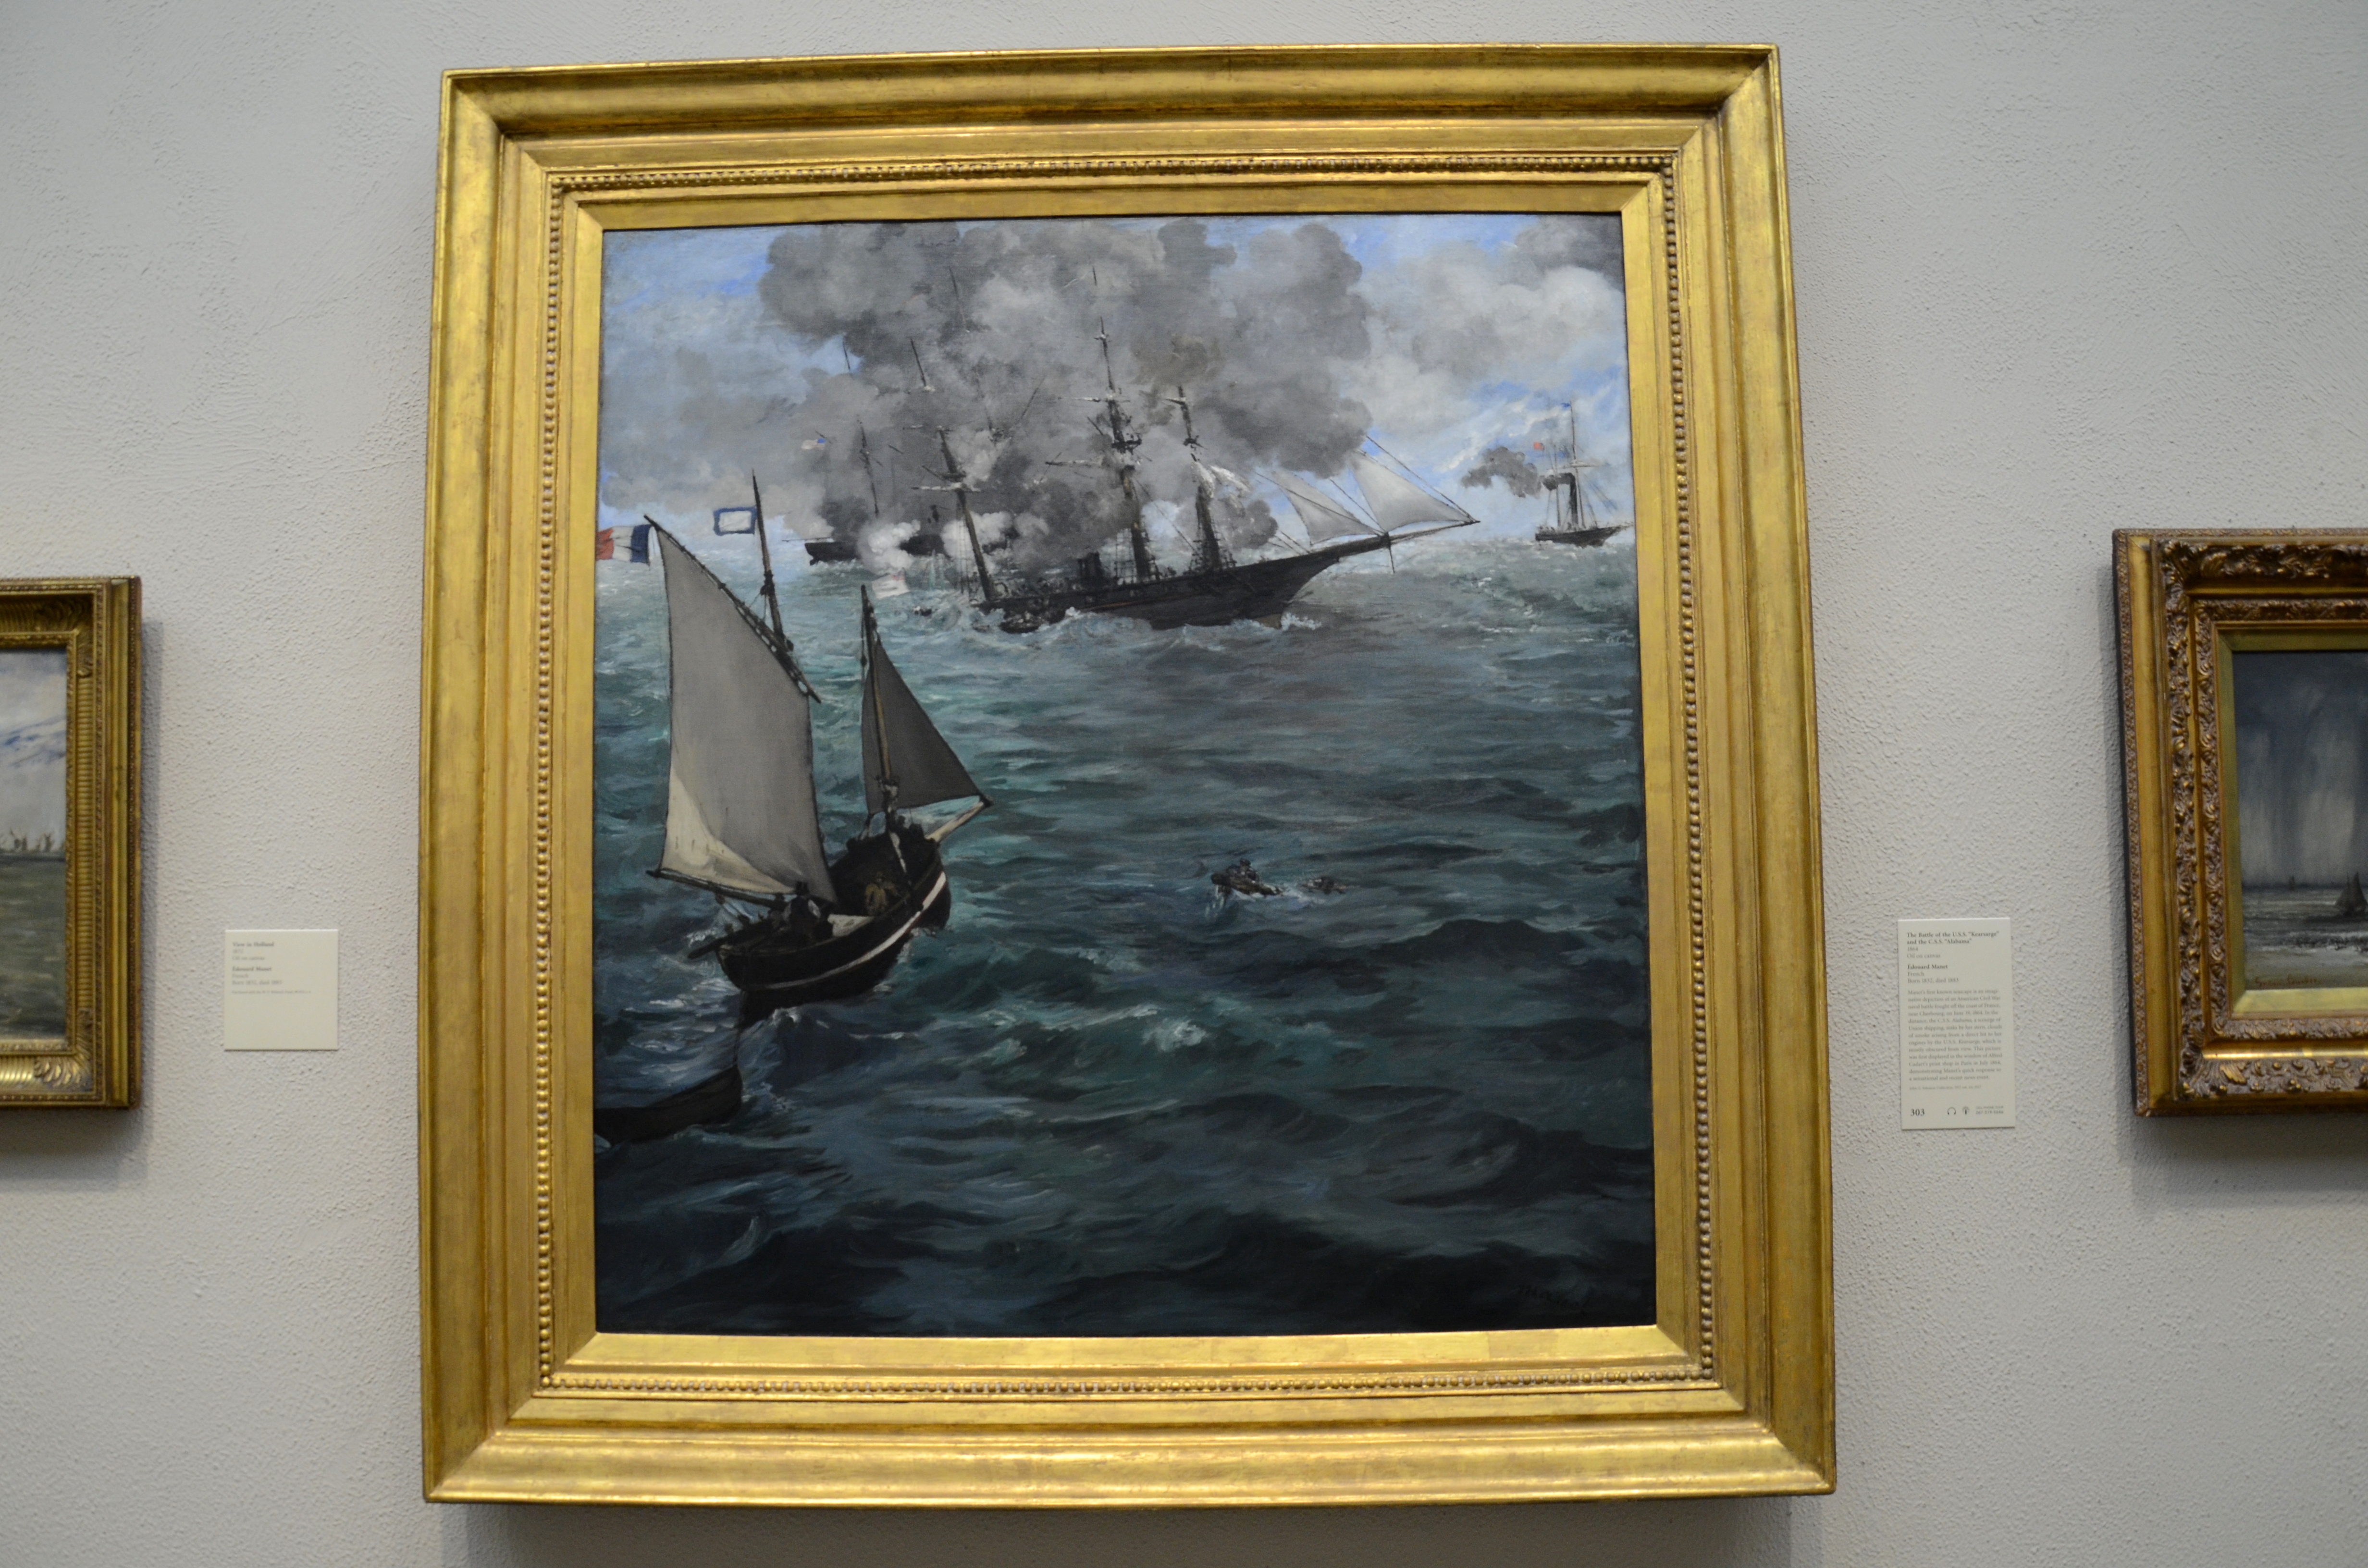 The Battle of the USS Kearsarge and the CSS Alabama By Claude Monet hanging today at the Philadelphia Museum of Art.